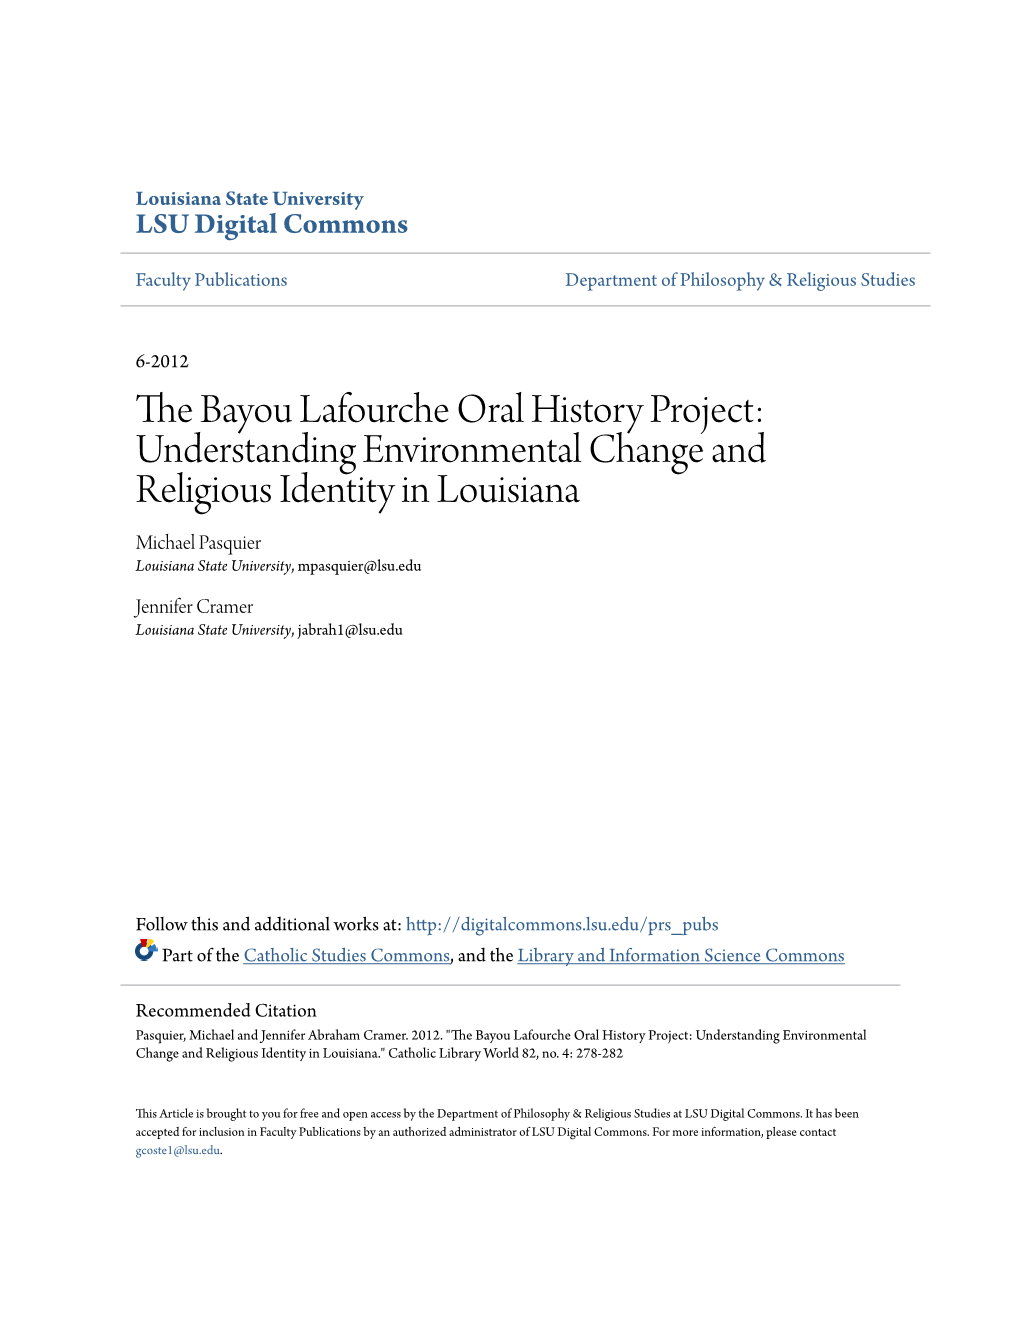 The Bayou Lafourche Oral History Project: Understanding Environmental Change and Religious Identity in Louisiana